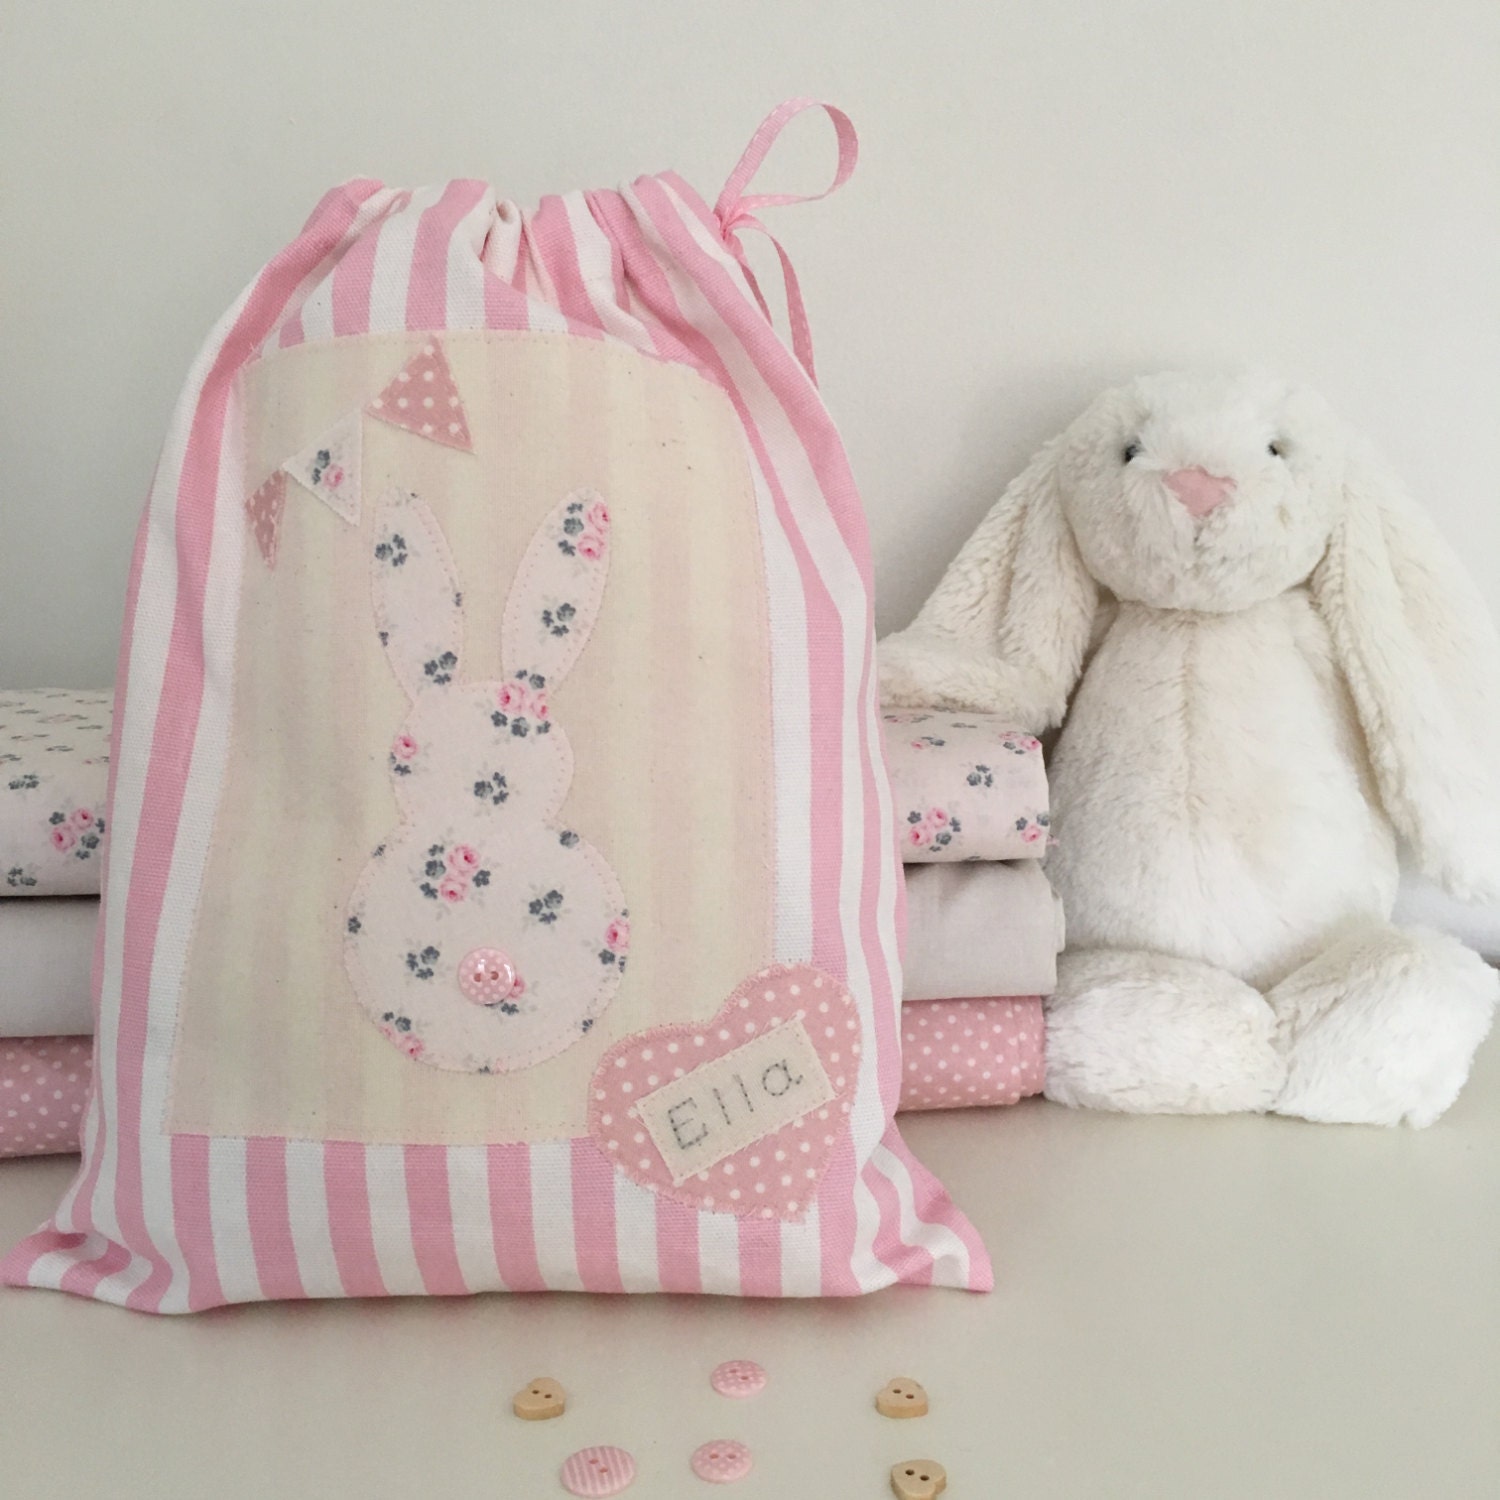 Personalised Easter Bag Drawstring by CocoBlueDesign on Etsy